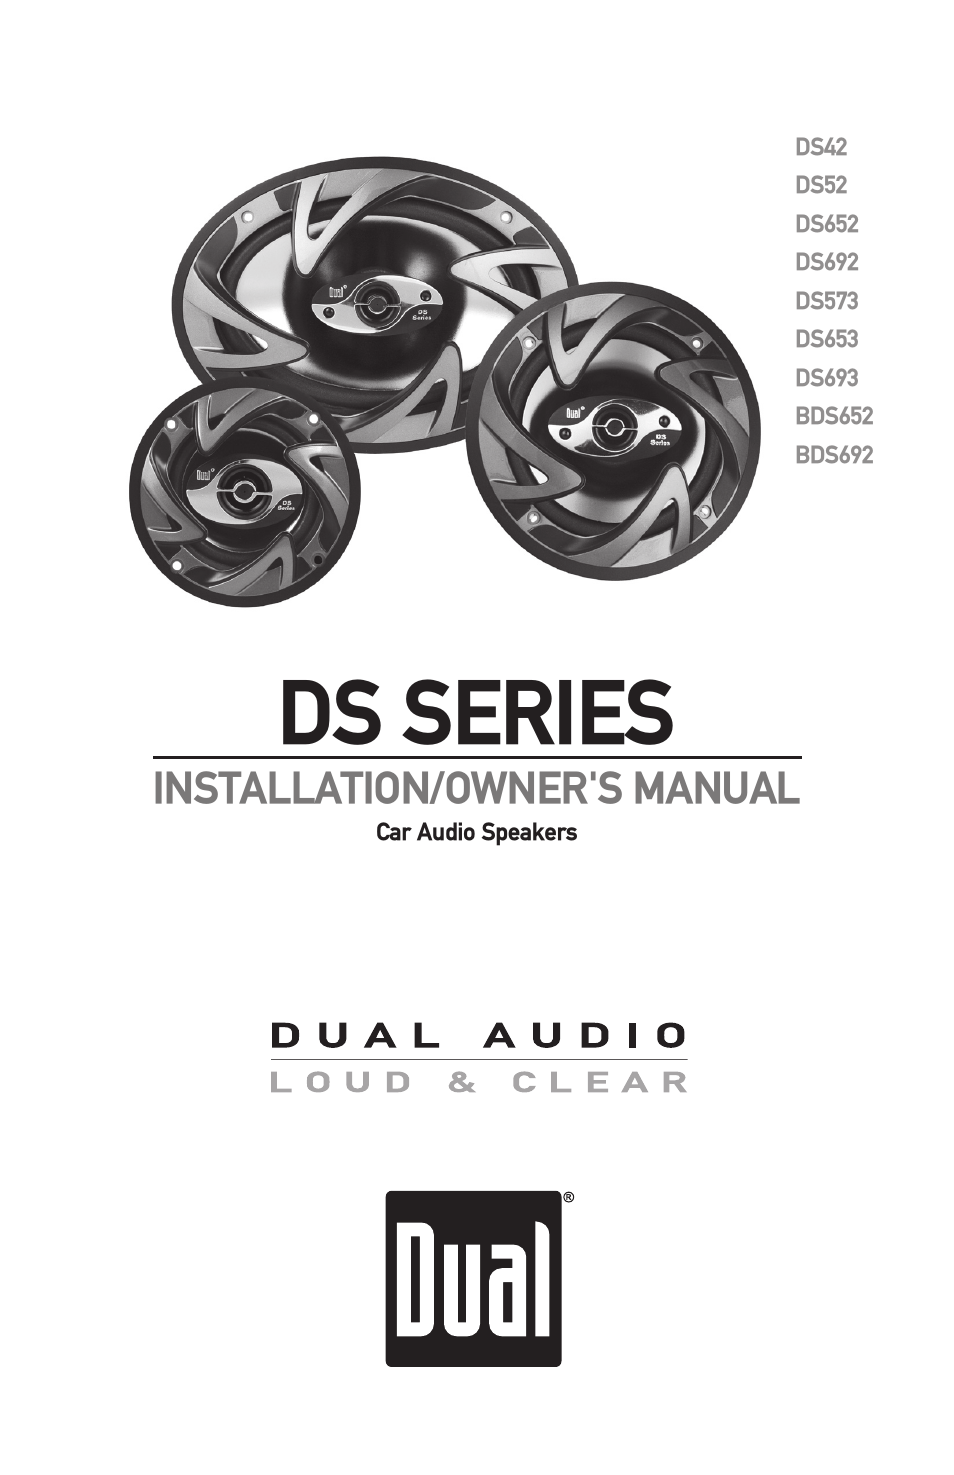 DS SERIES DS42